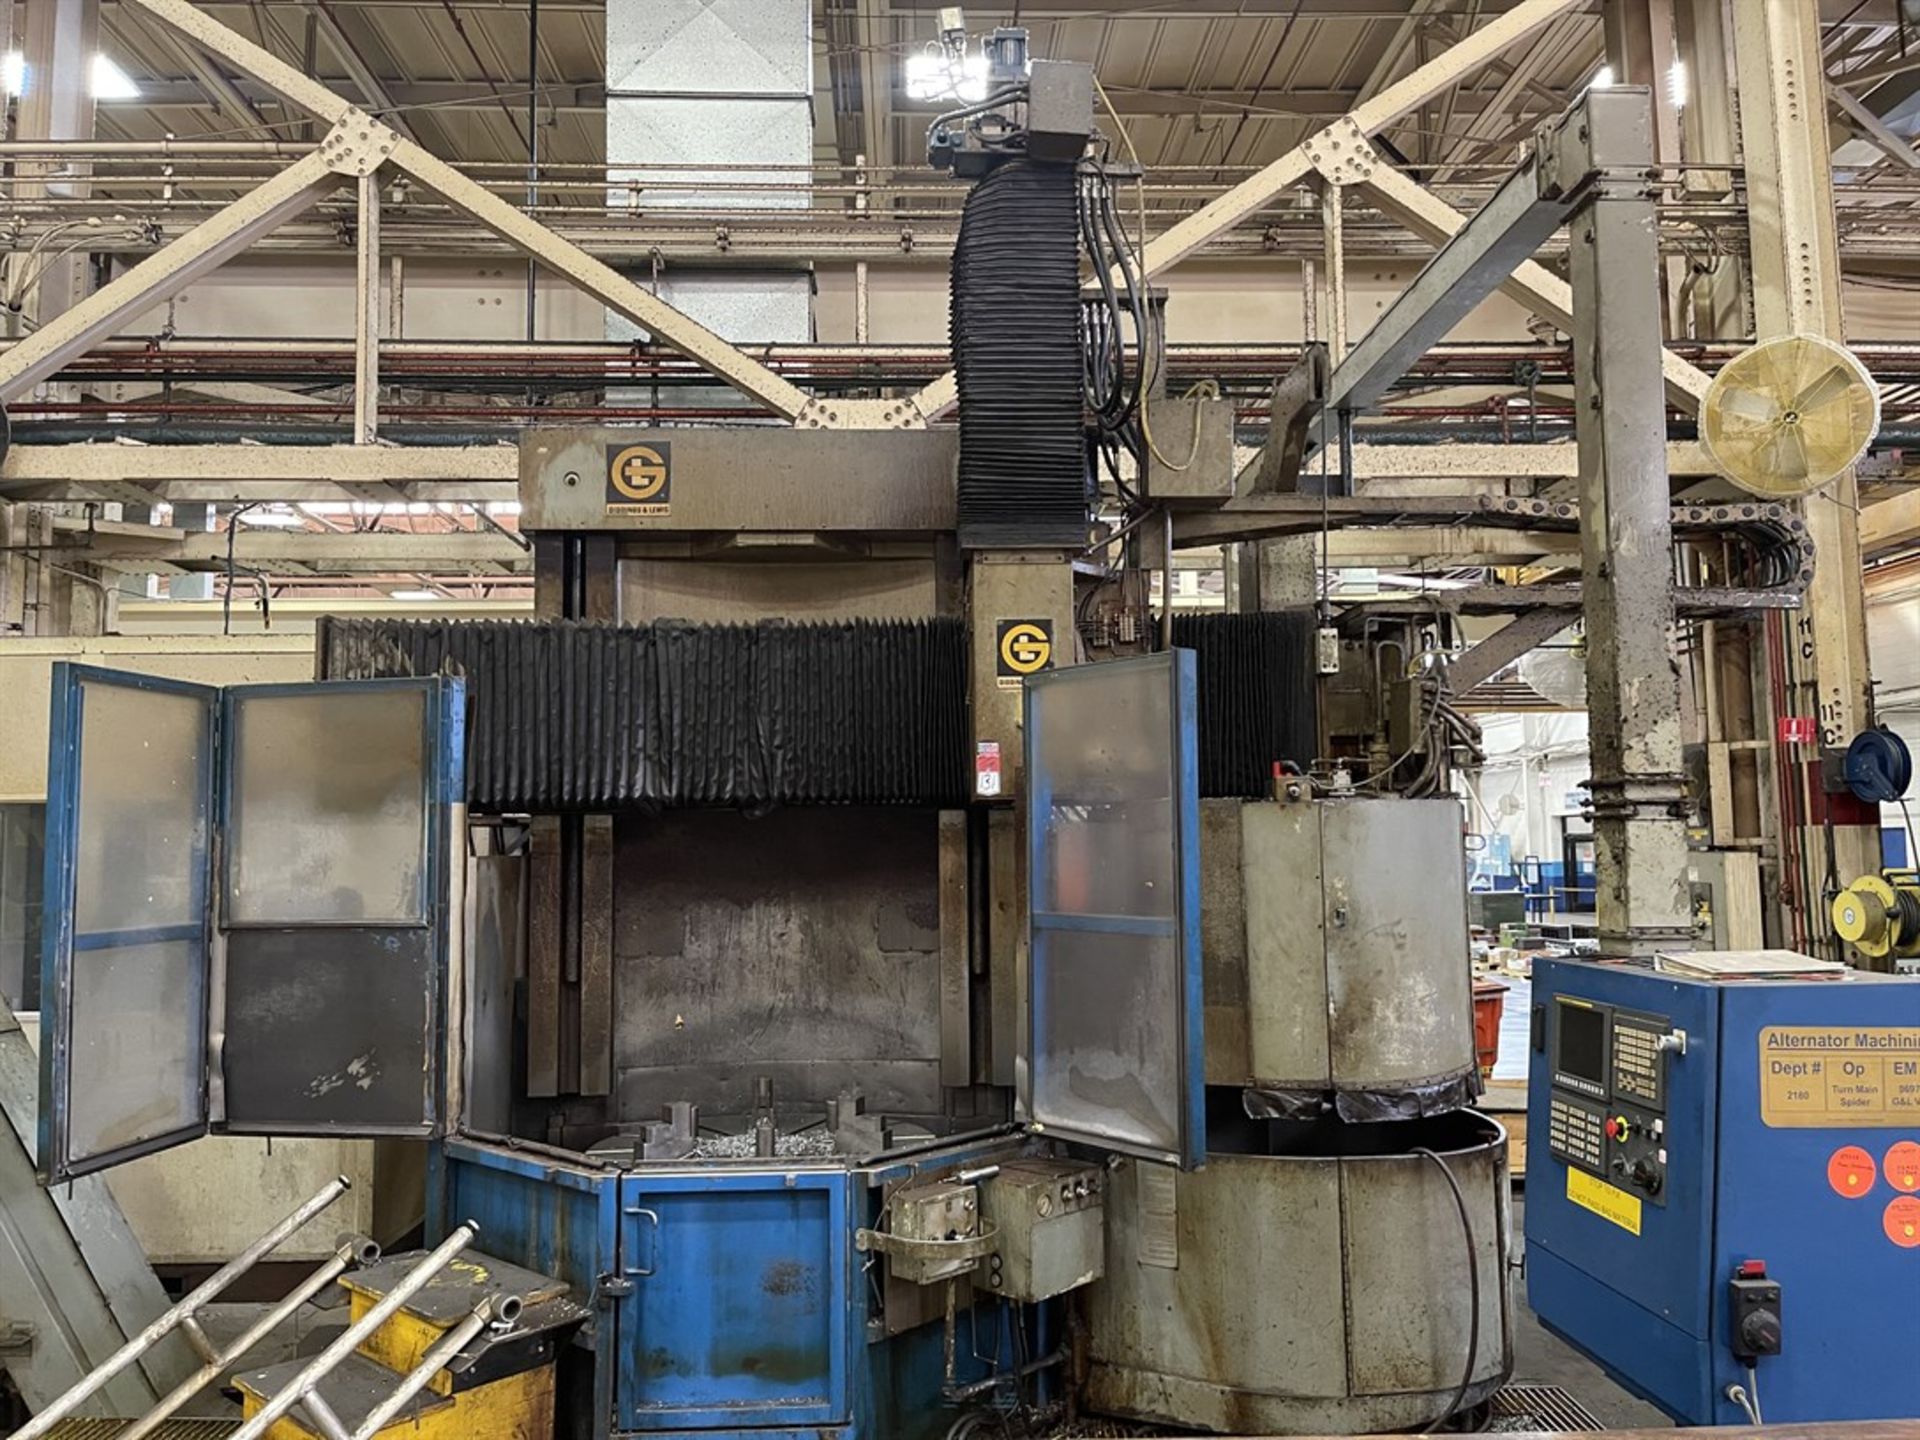 GIDDINGS & LEWIS 48" CNC Vertical Boring Mill, s/n 512-67-77, w/ FANUC 0i-TD Control, 48" Table - Image 2 of 10